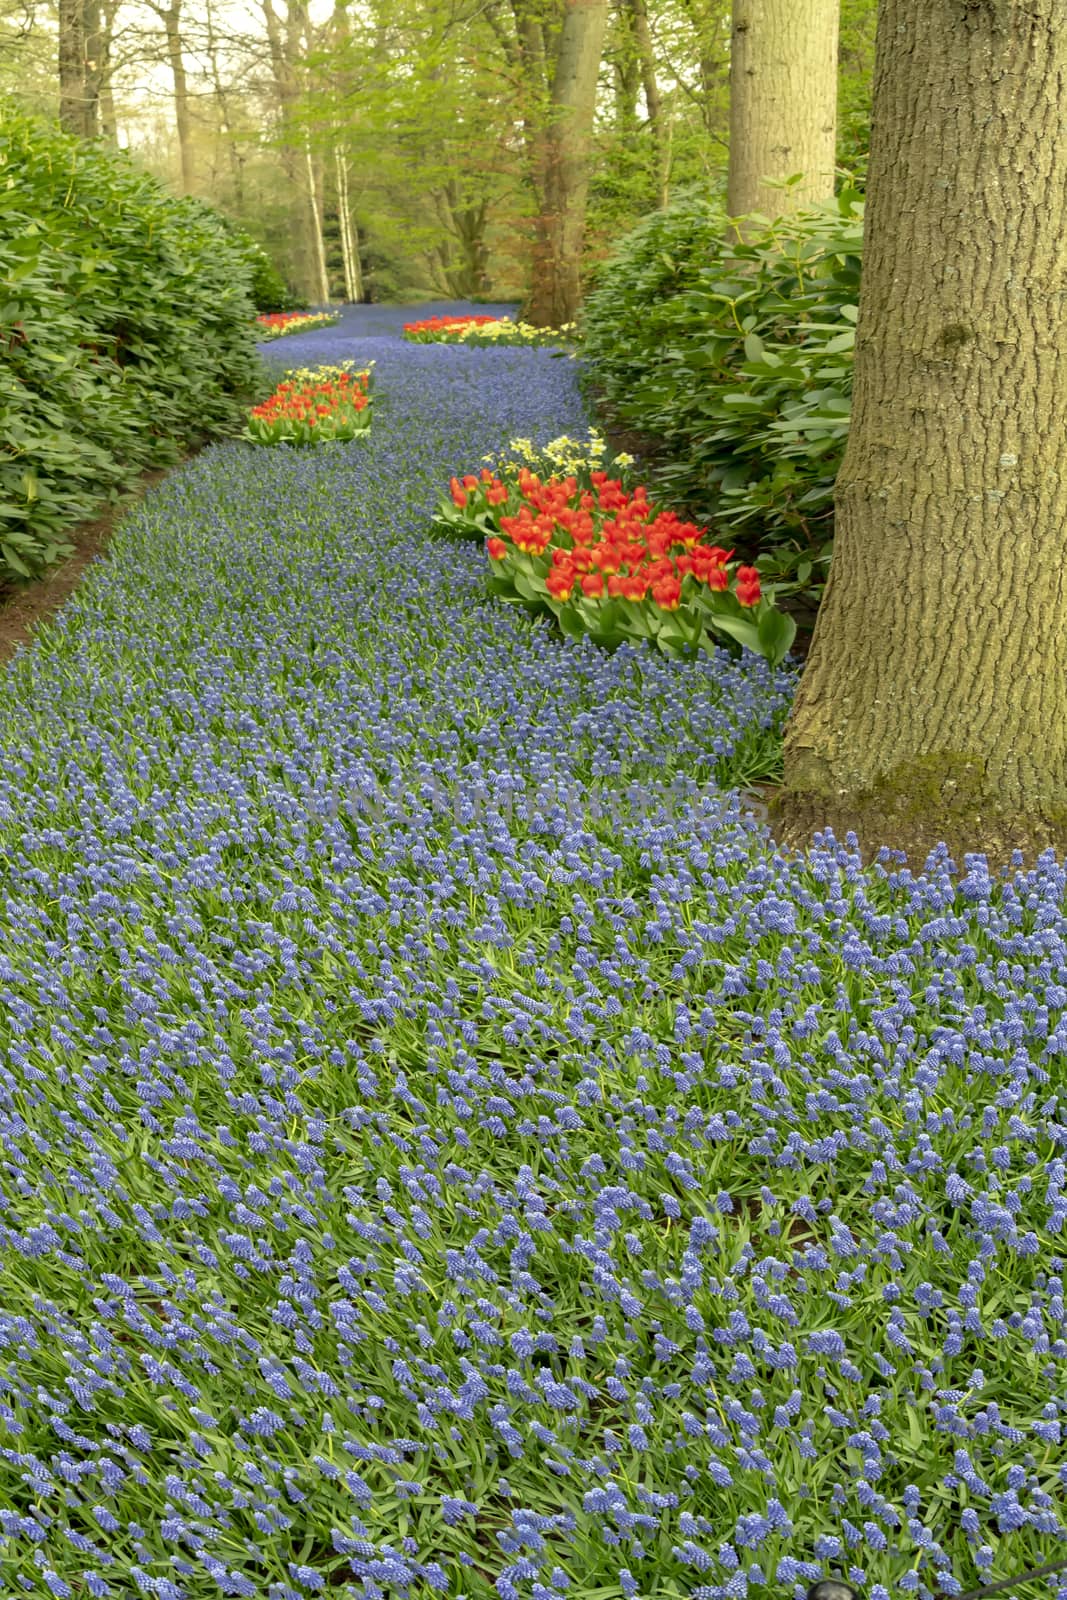 Blues flowers growing around trees and green grass in a well maintained spring garden in Netherlands by ankorlight